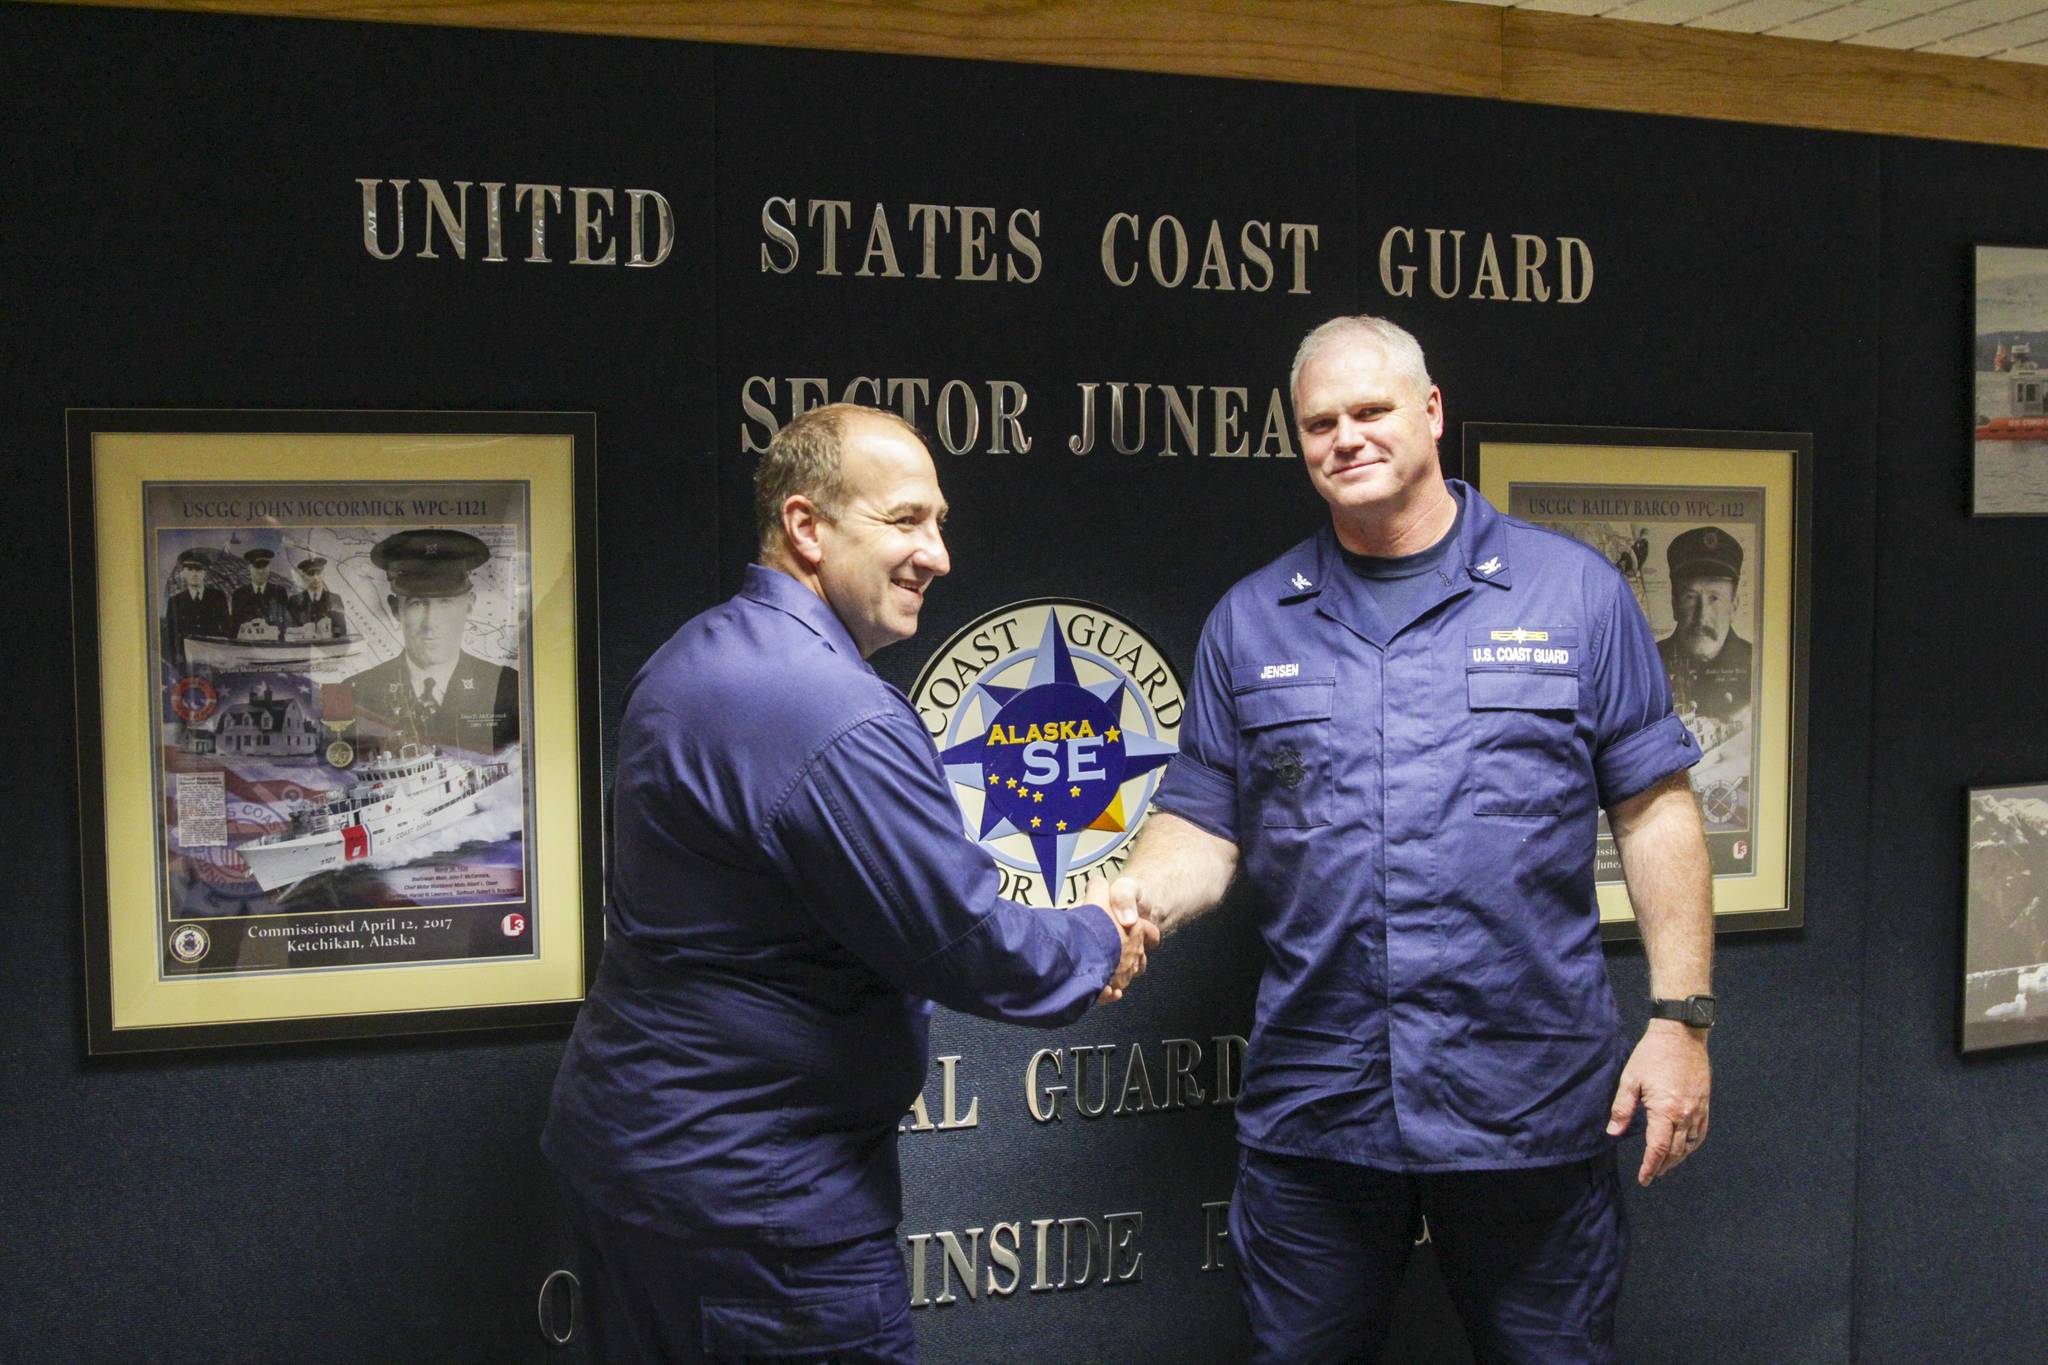 Capt. Darwin A. Jensen, right, will take command of Sector Juneau from Capt. Stephen R. White, left, on July 7, 2021. (Michael S. Lockett / Juneau Empire)